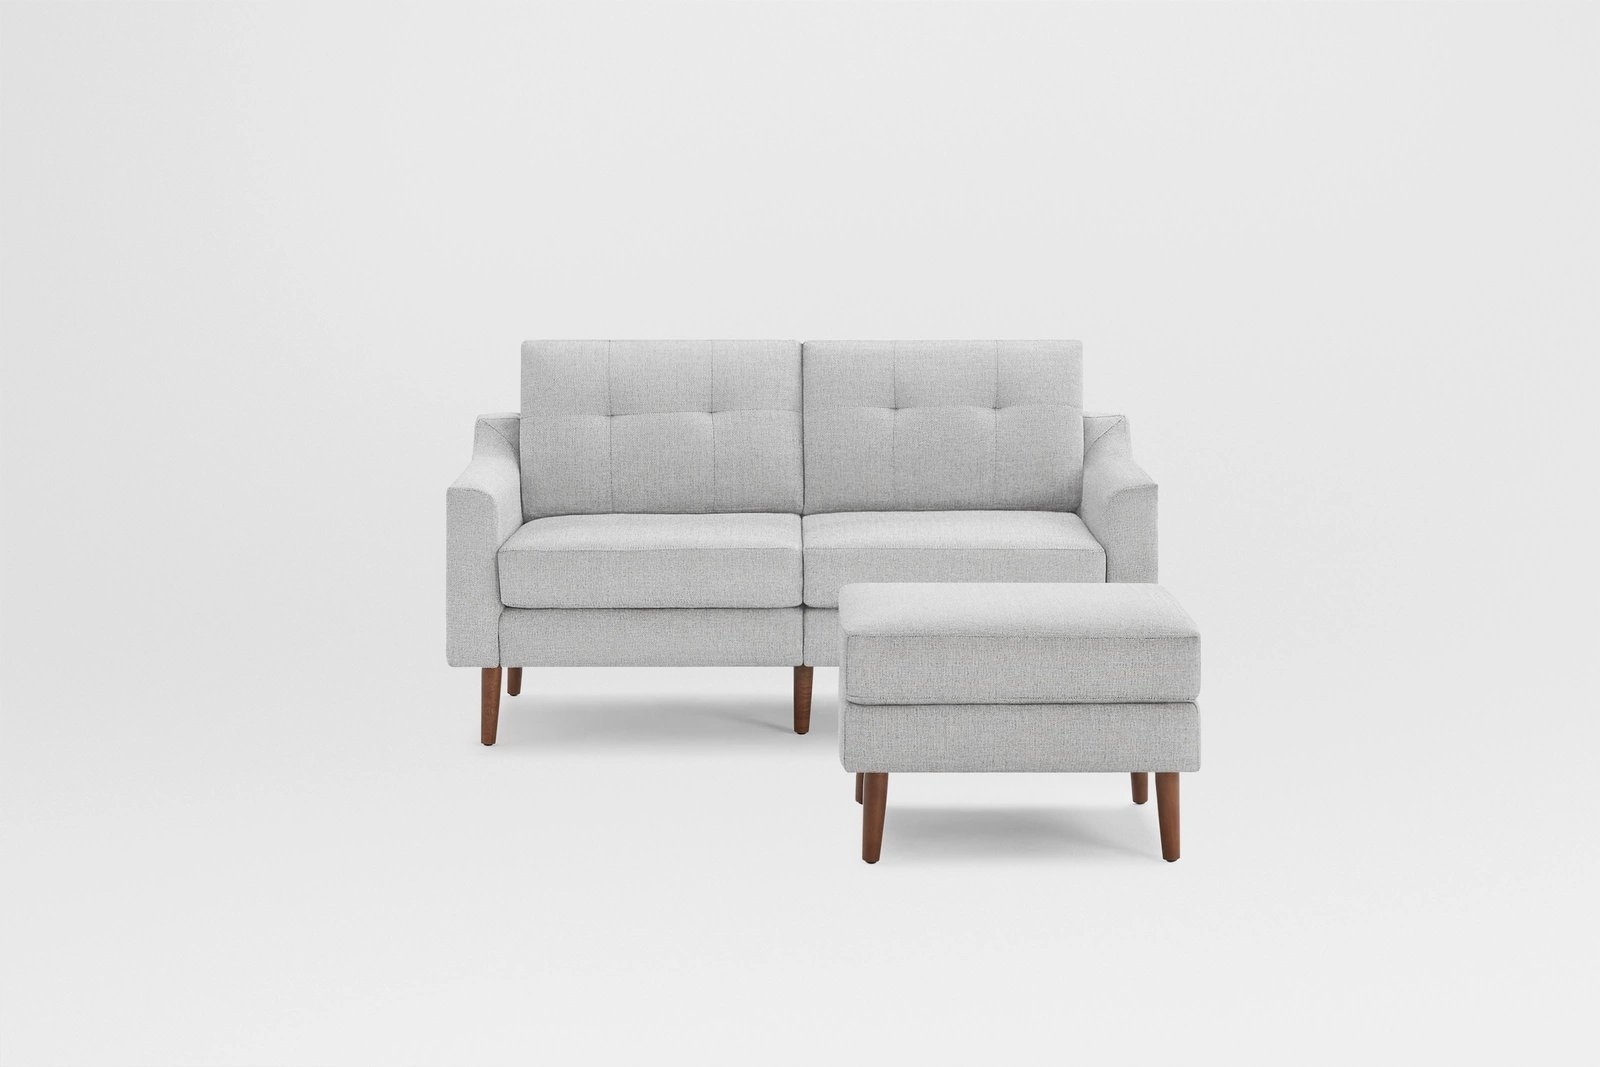 Loveseat with Ottoman - Image 3